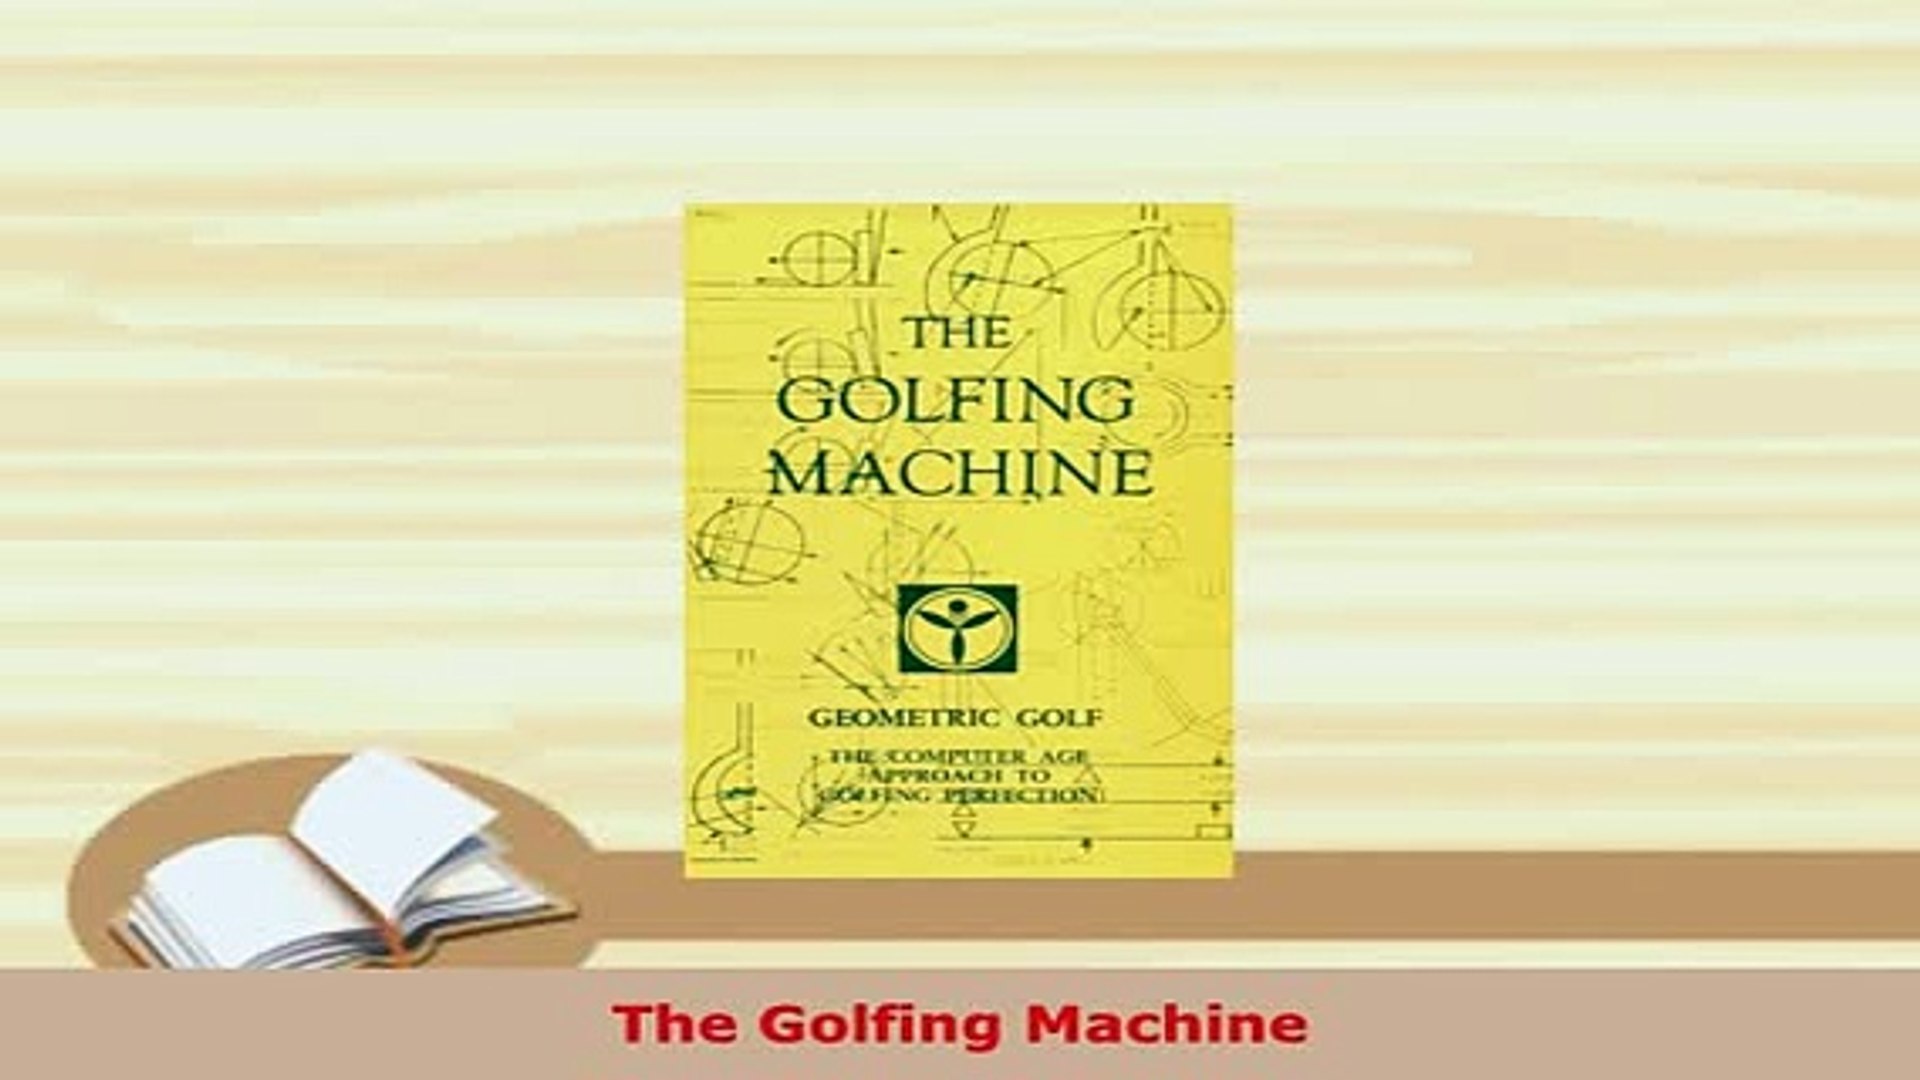 Download The Golfing Machine Free Books - video Dailymotion